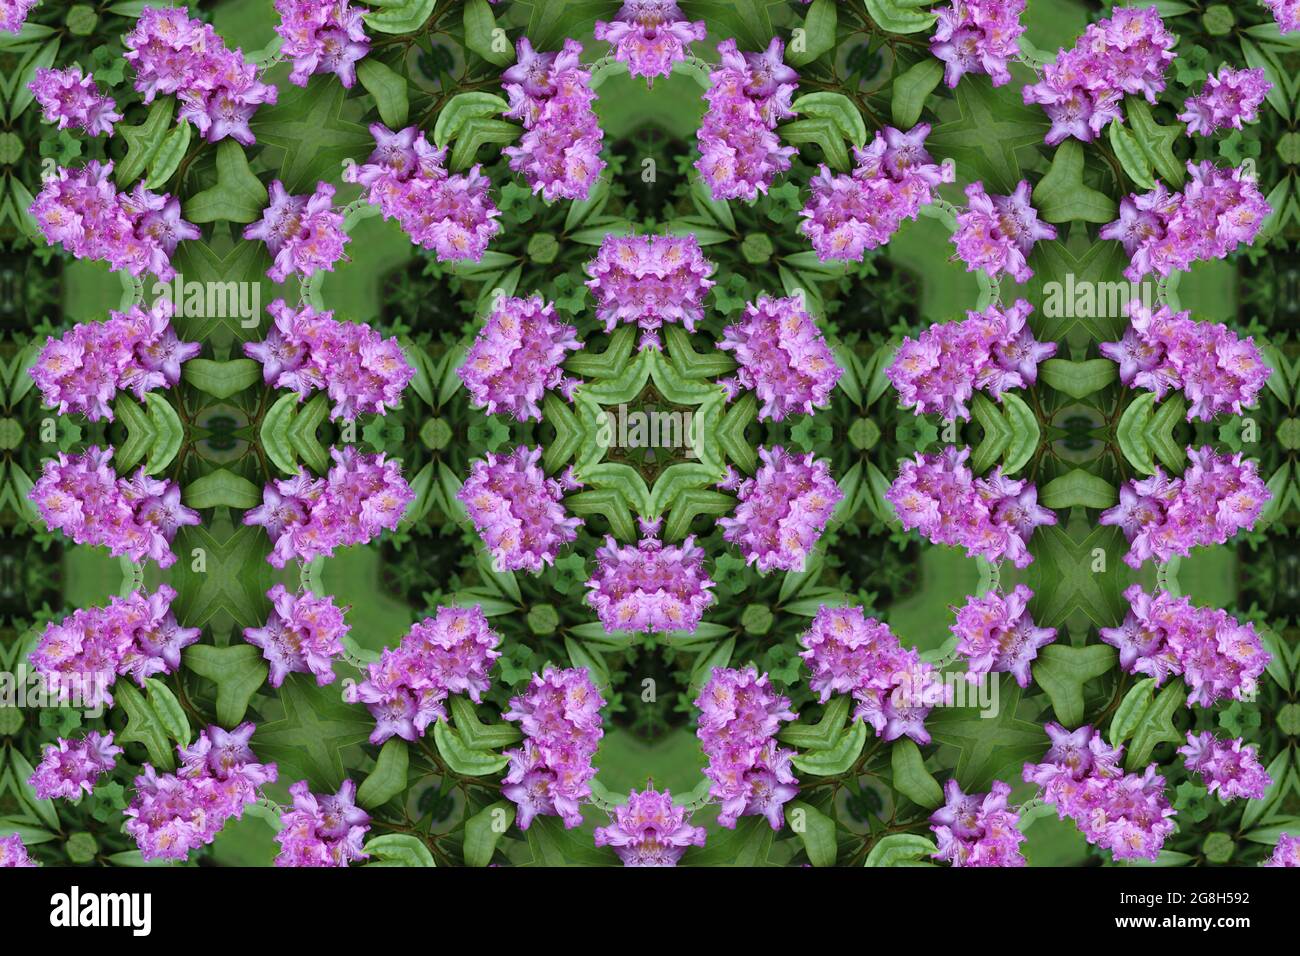 Kaleidoscope of flowers. Circles, flowers and hexagons abstract wallpaper and backdrops. Complex geometric flower patterns and digital art. Stock Photo